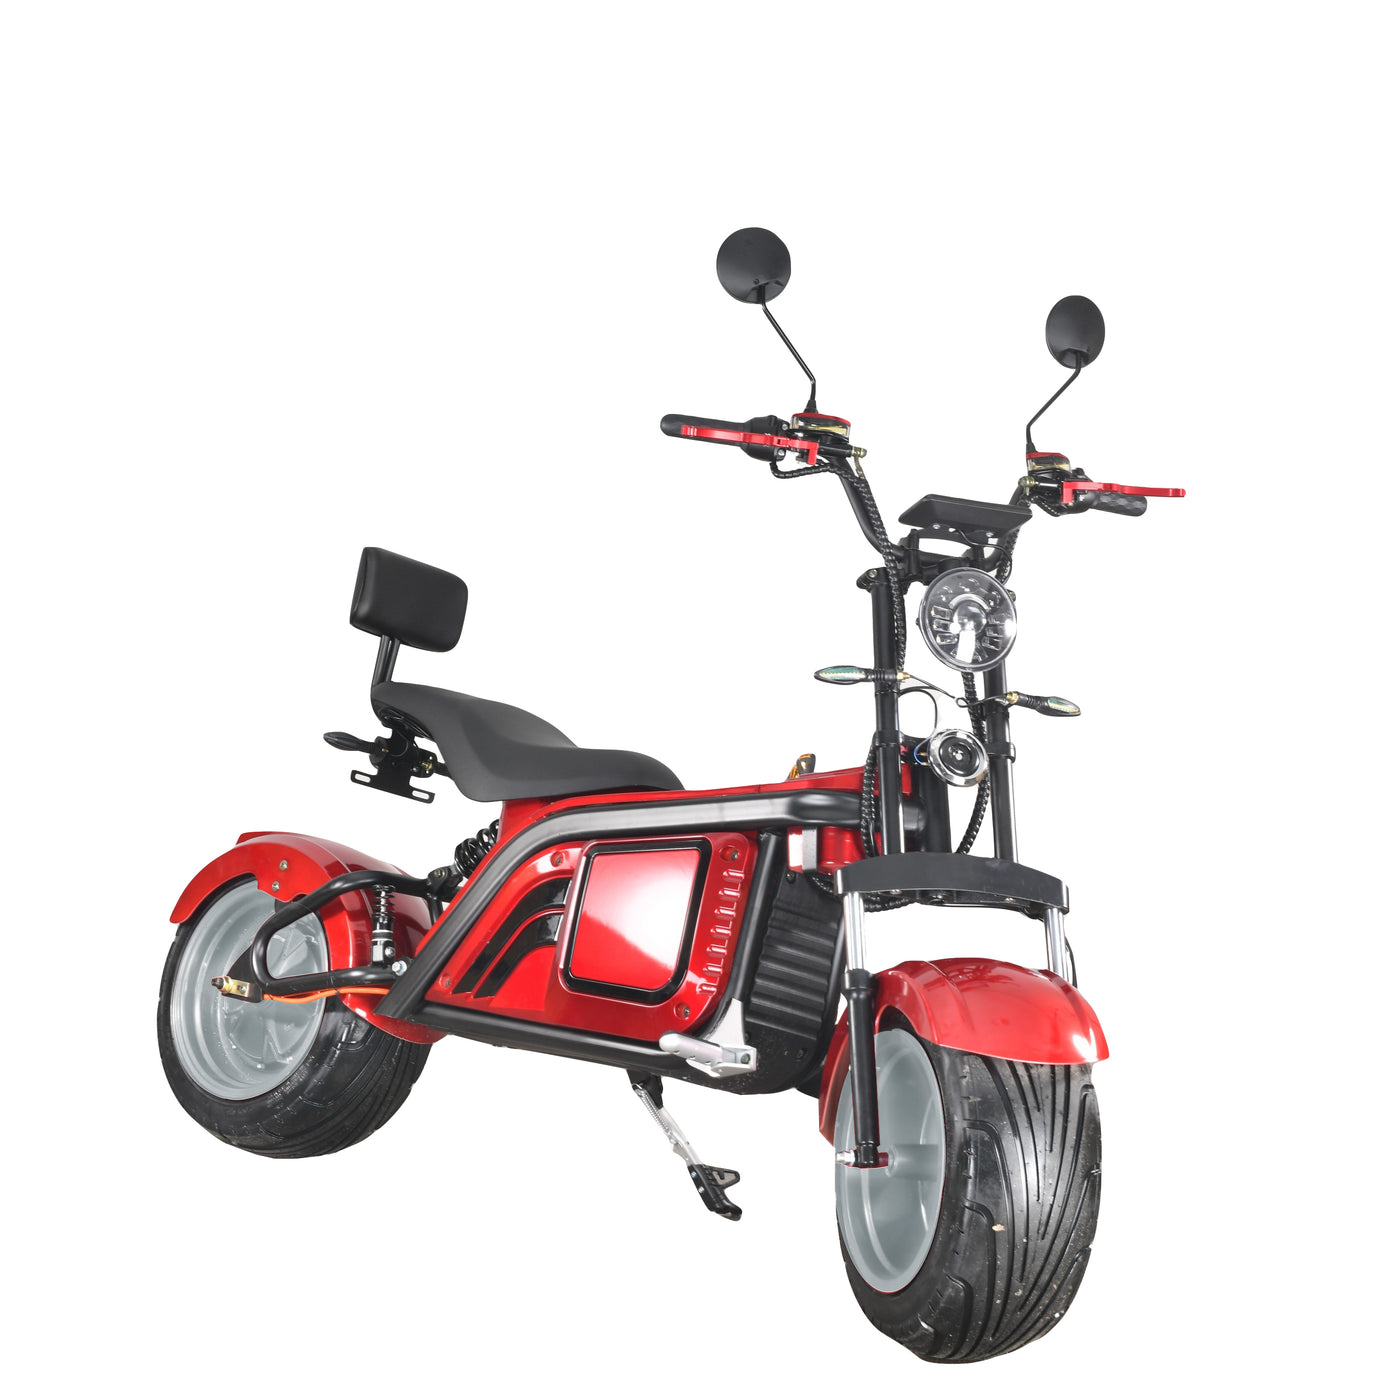 M9P  Super Range 100Miles Electric Motorcycle Scooter 3000W 55Ah 50MPH